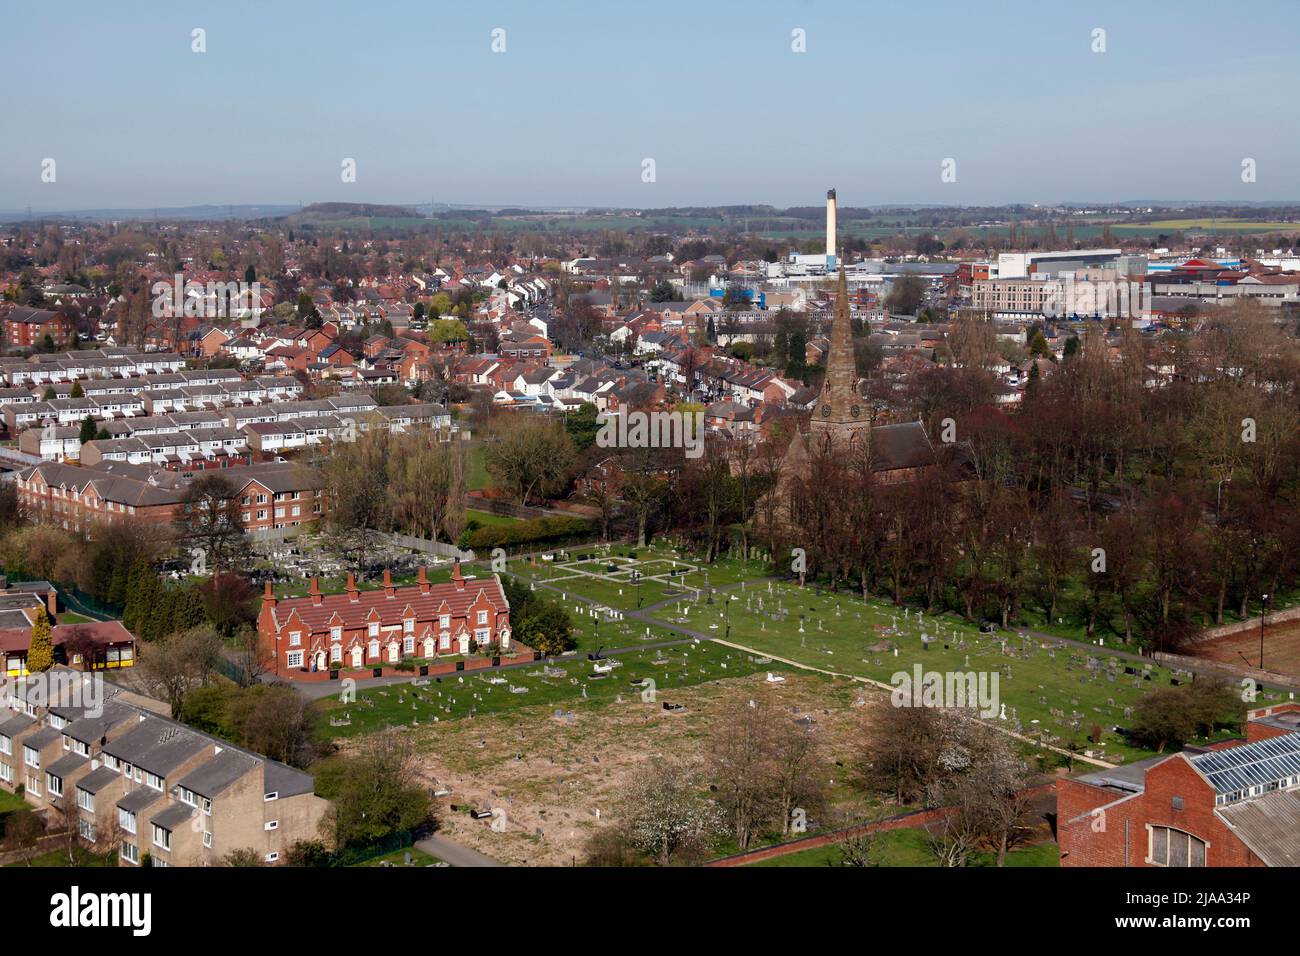 Aerial View of Heath Town, Wolverhampton with Holy Trinity Almshouses and Holy Trinity Church Holy Trinity Church. 2018 Stock Photo